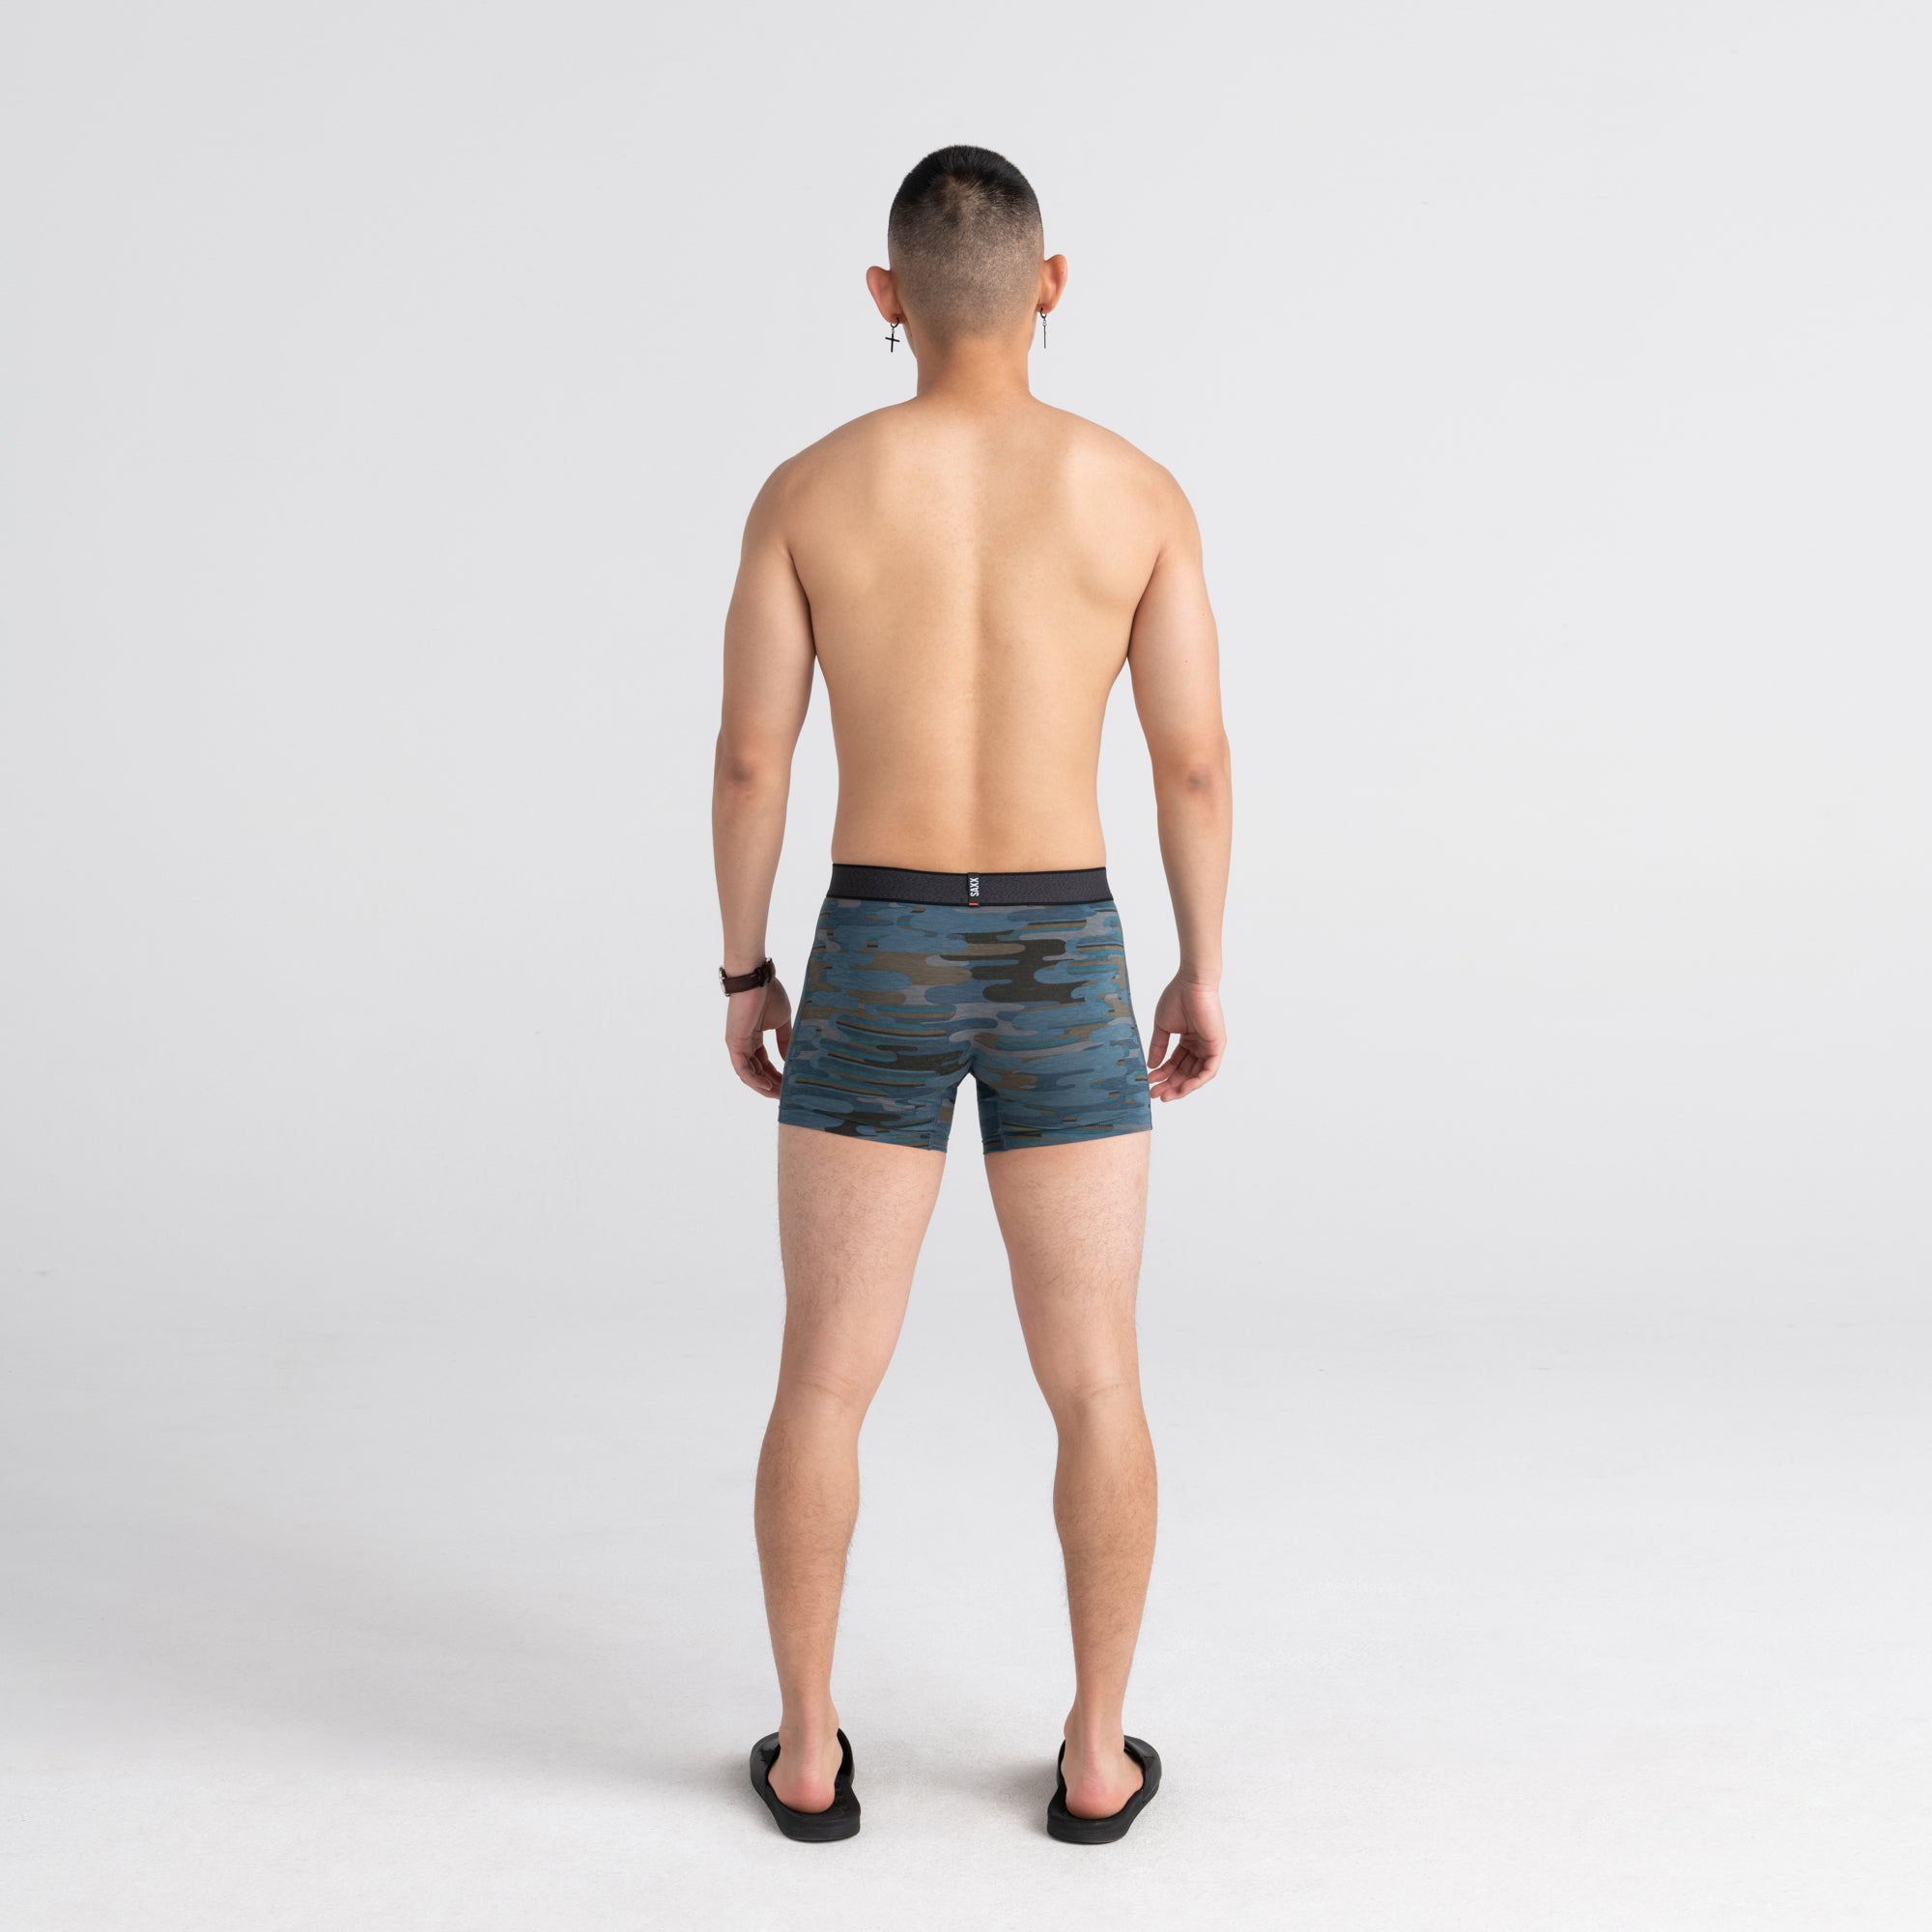 Back - Model wearing Viewfinder Baselayer Boxer Brief Fly in Blue Up in Smoke Camo